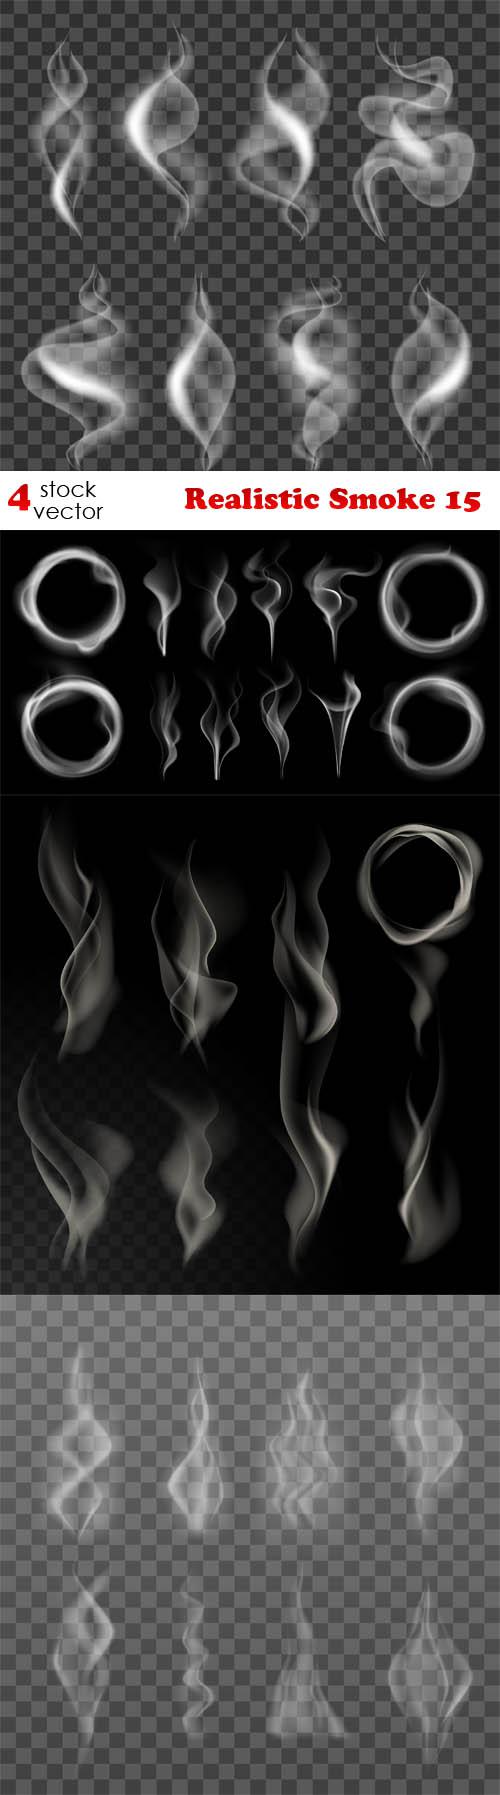 Realistic Smoke 15 » Daz3D and Poses stuffs download free - Discussion ...